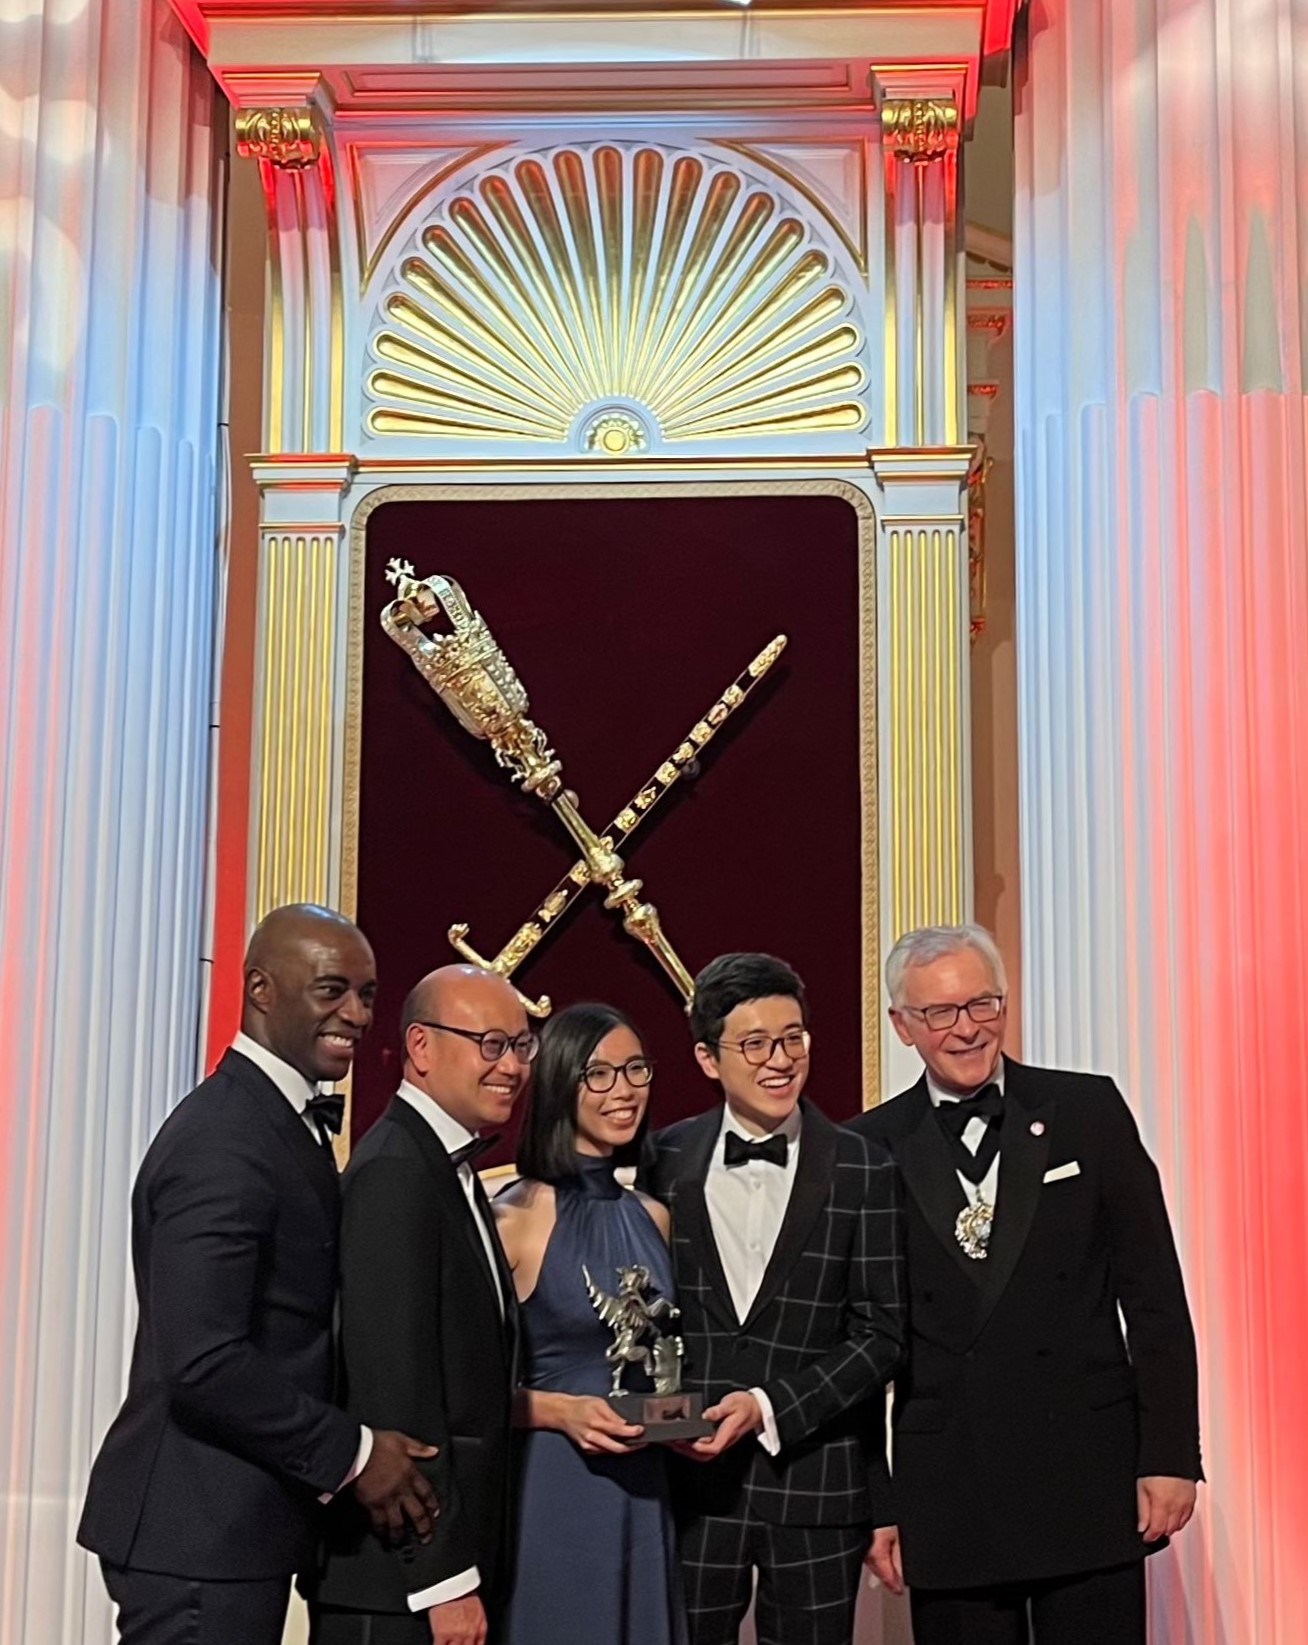 A group of 5 smiling people stand in front of a burgundy background, holding a dragon-shaped award